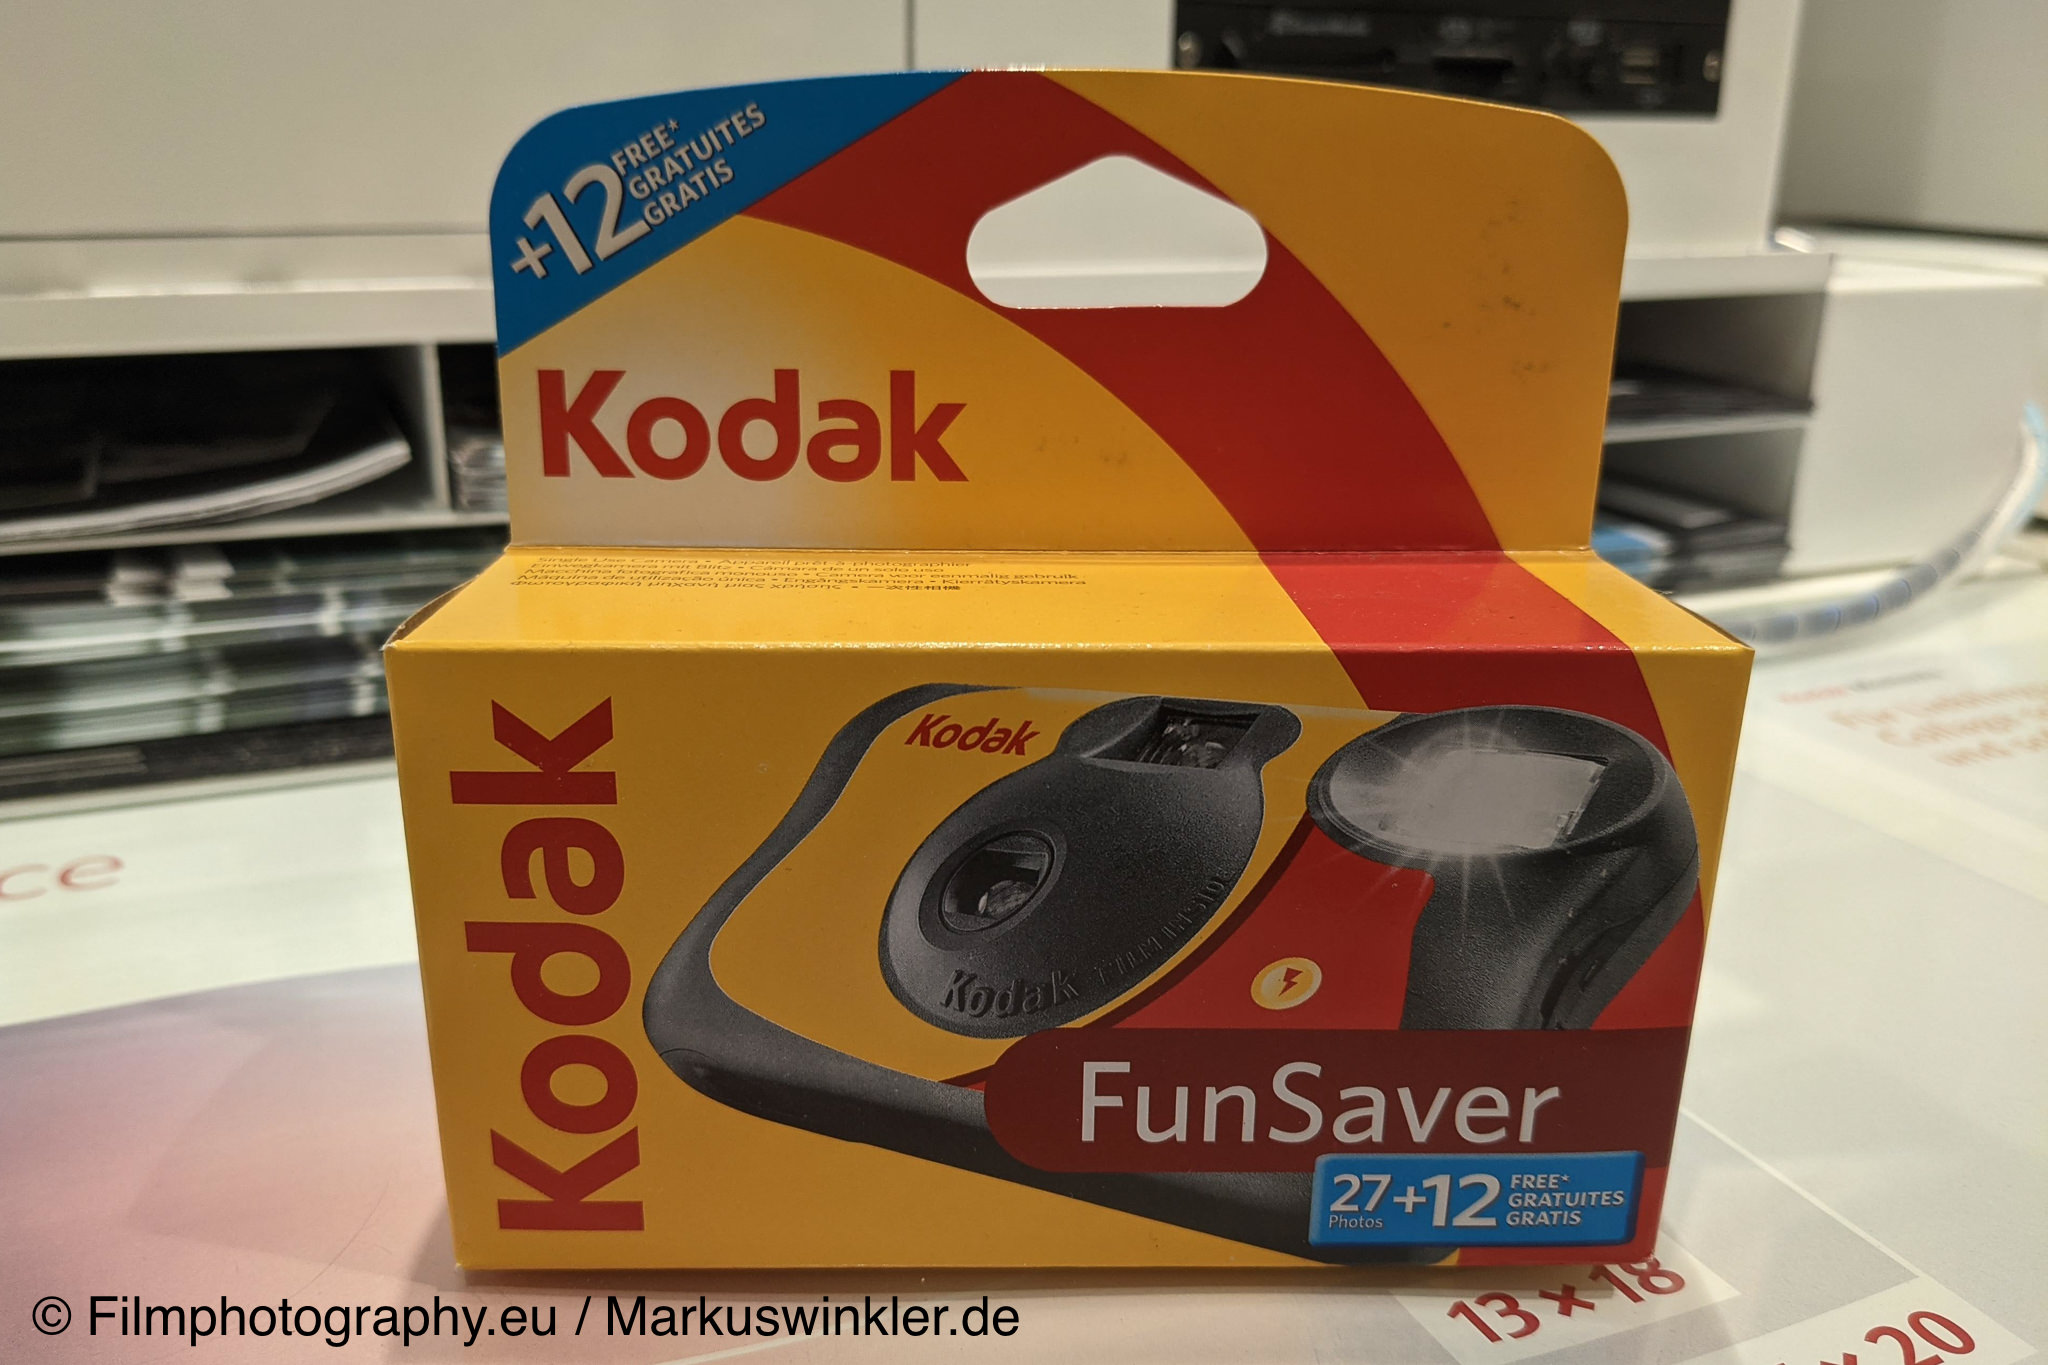 Kodak FunSaver  Guide about functions, films and development